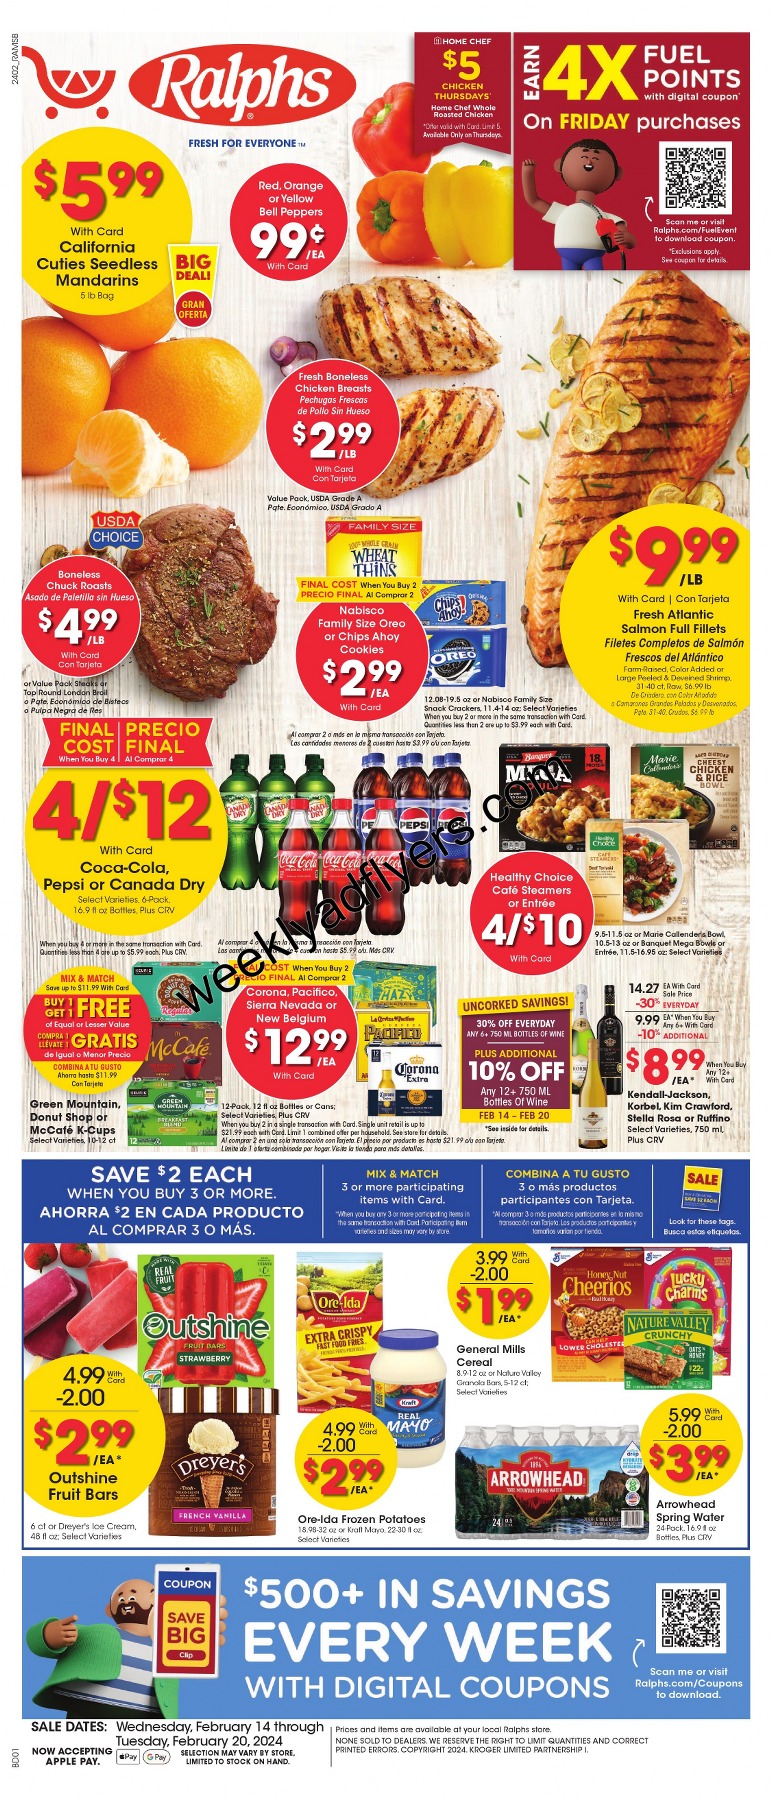 Ralphs Weekly Ad February 14 to February 20, 2024 1 – ralphs ad 1 1